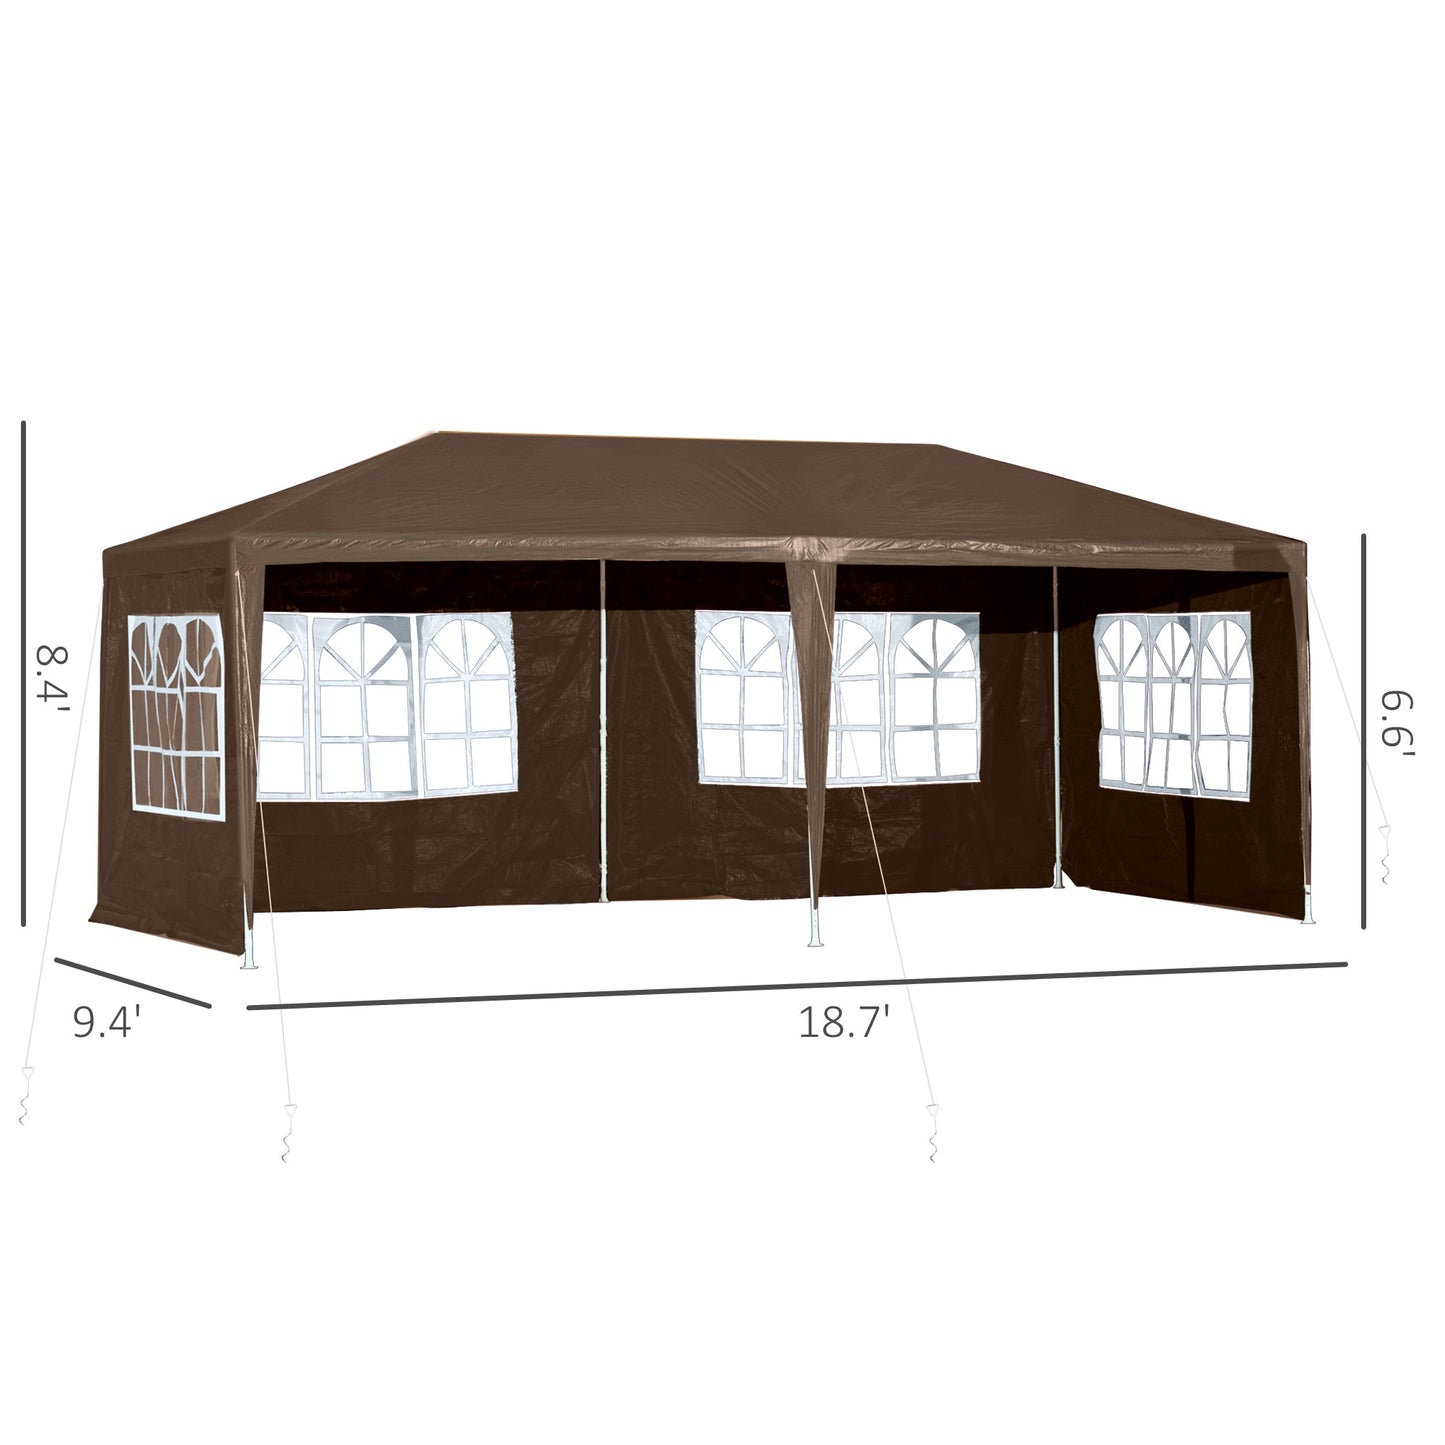 18.7' x 9.4' Party Tent, Portable Folding Wedding Tent, Garden Canopy Event Shelter, Outdoor Sunshade with 4 Removable Sidewalls, Coffee at Gallery Canada